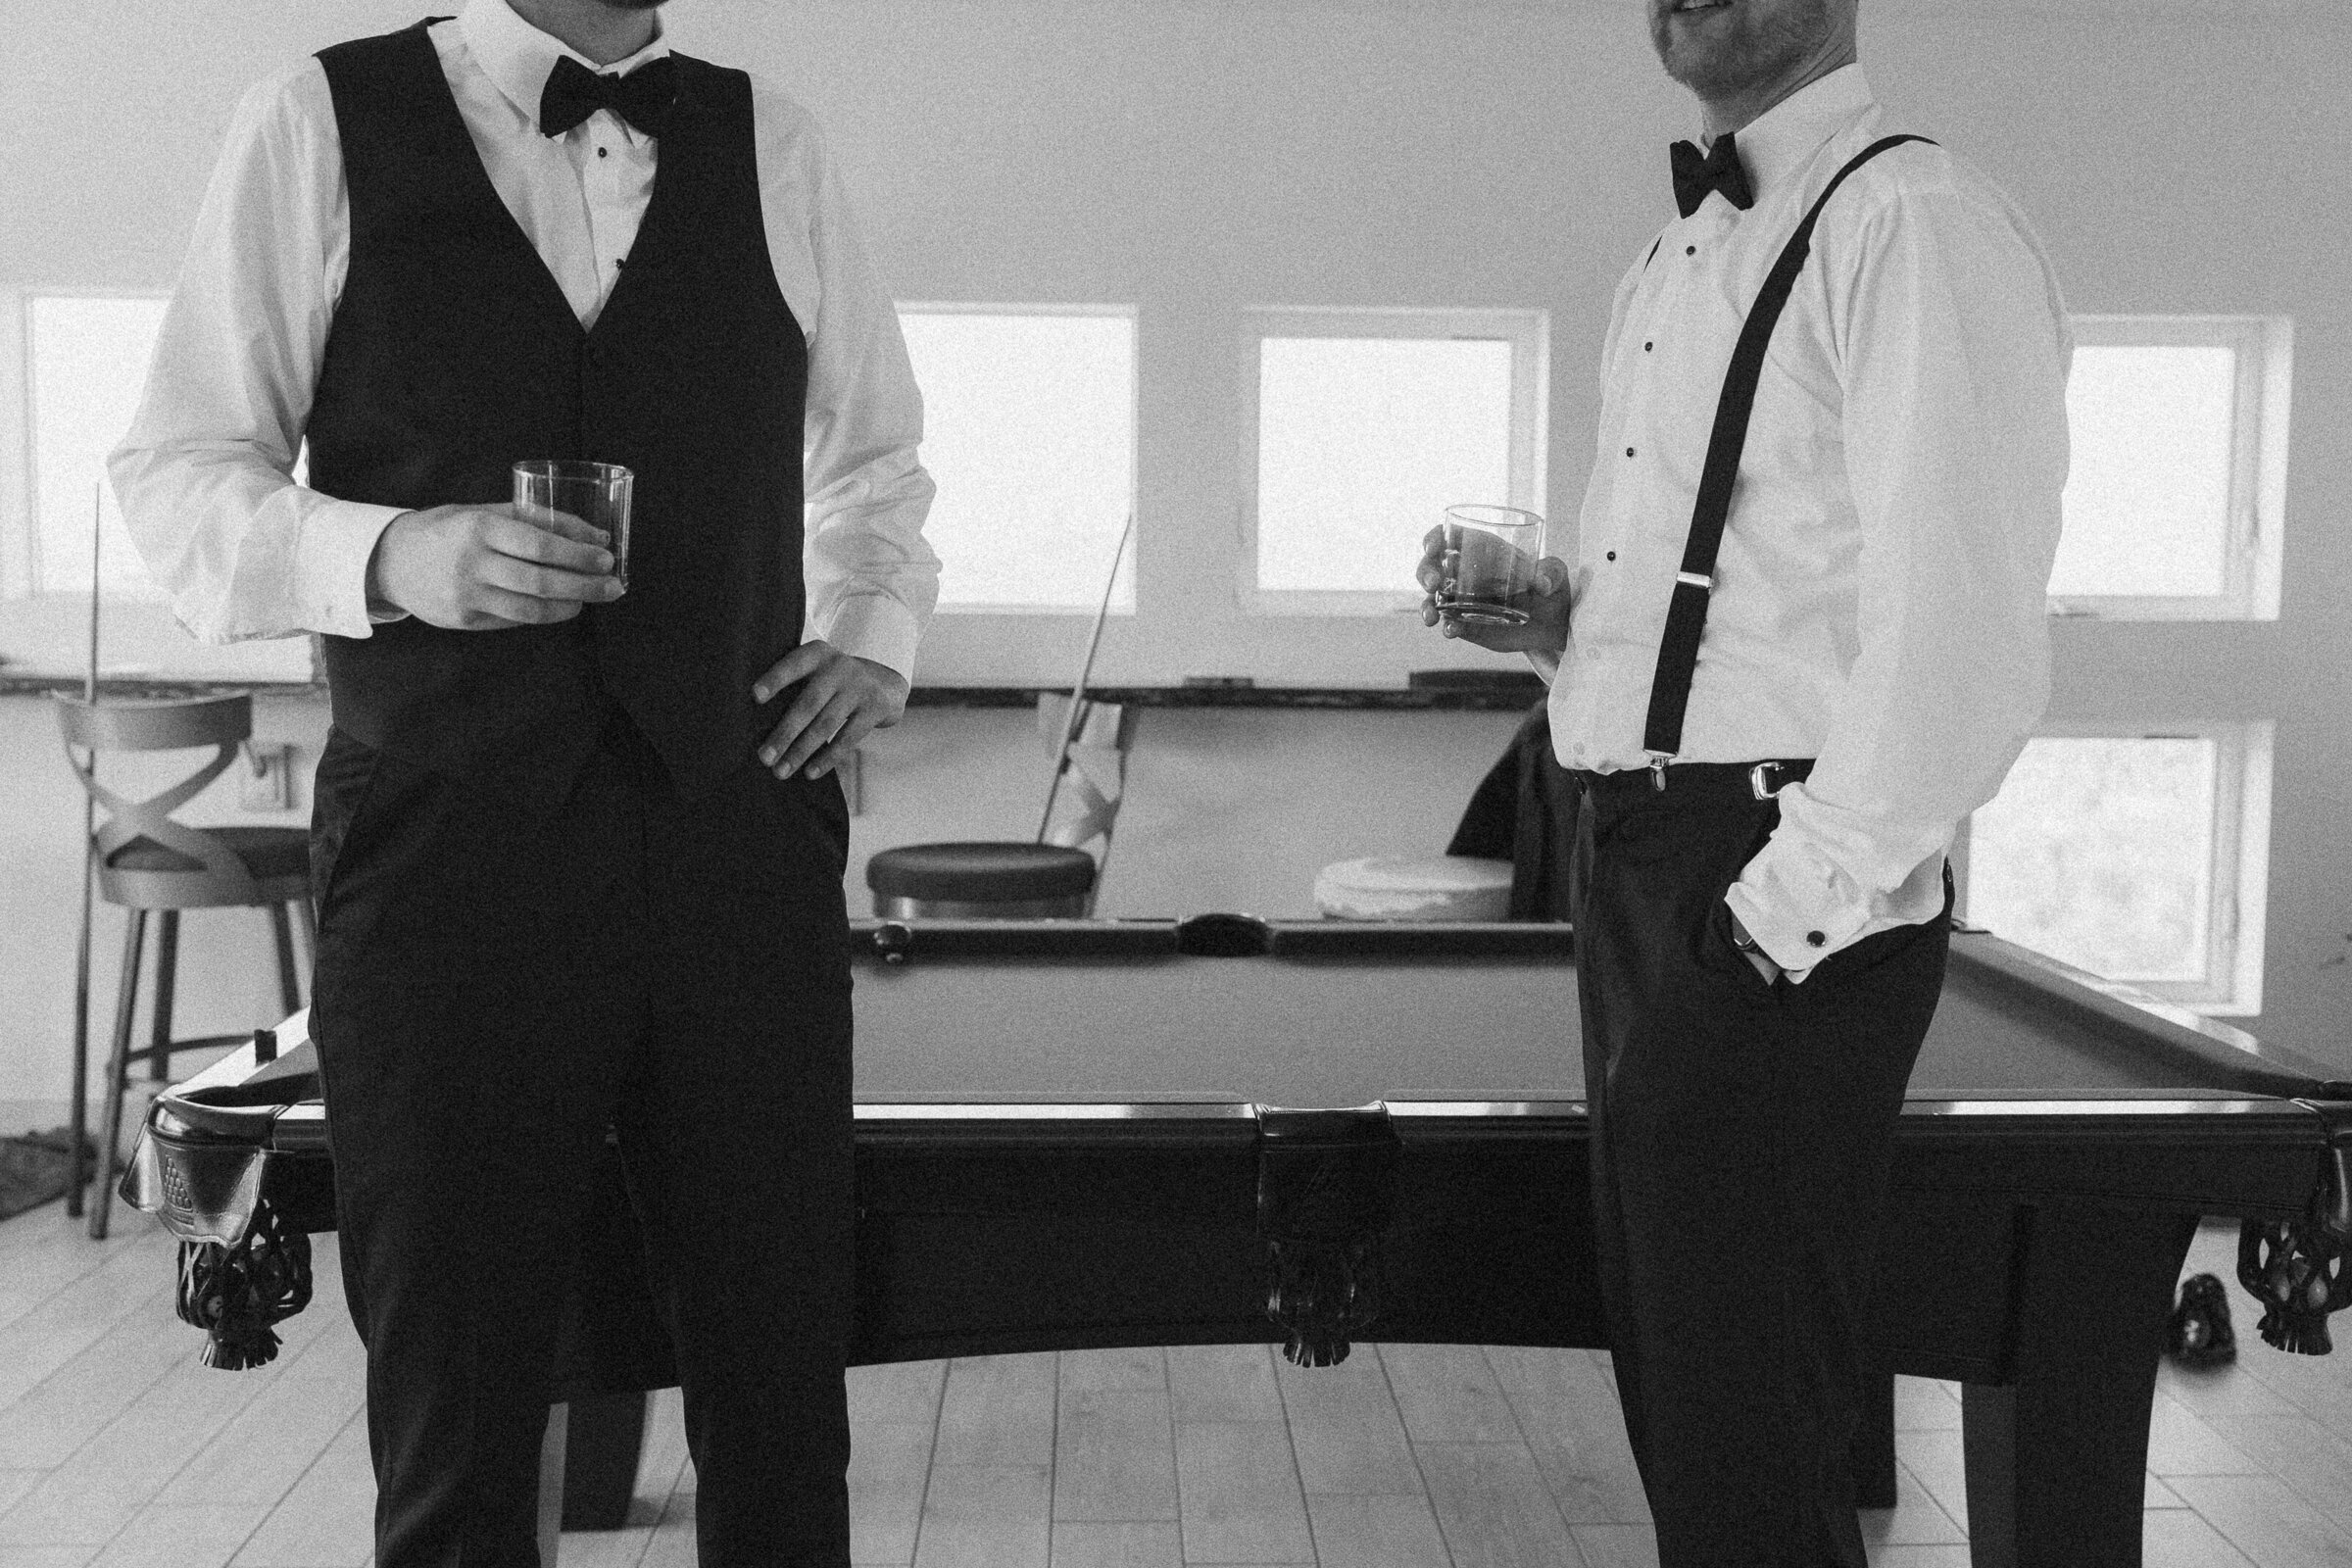 Two men in formal wear with a billiard table, black and white photo.